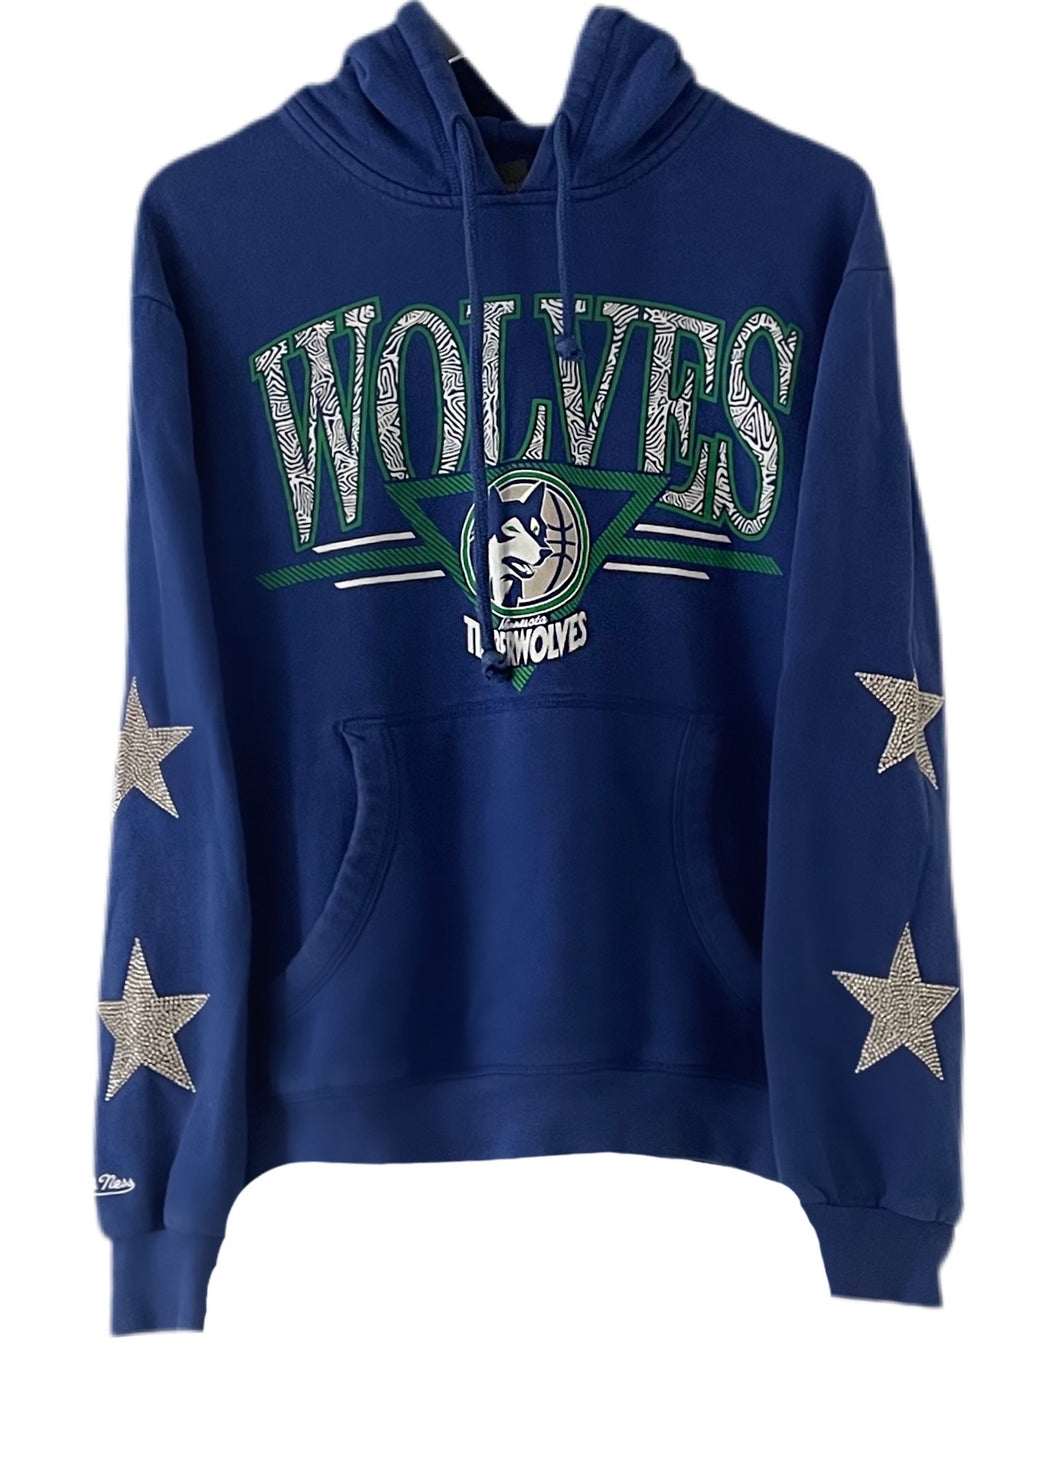 Minnesota Timberwolves, NBA One of a KIND Vintage Hoodie with Crystal Star Design